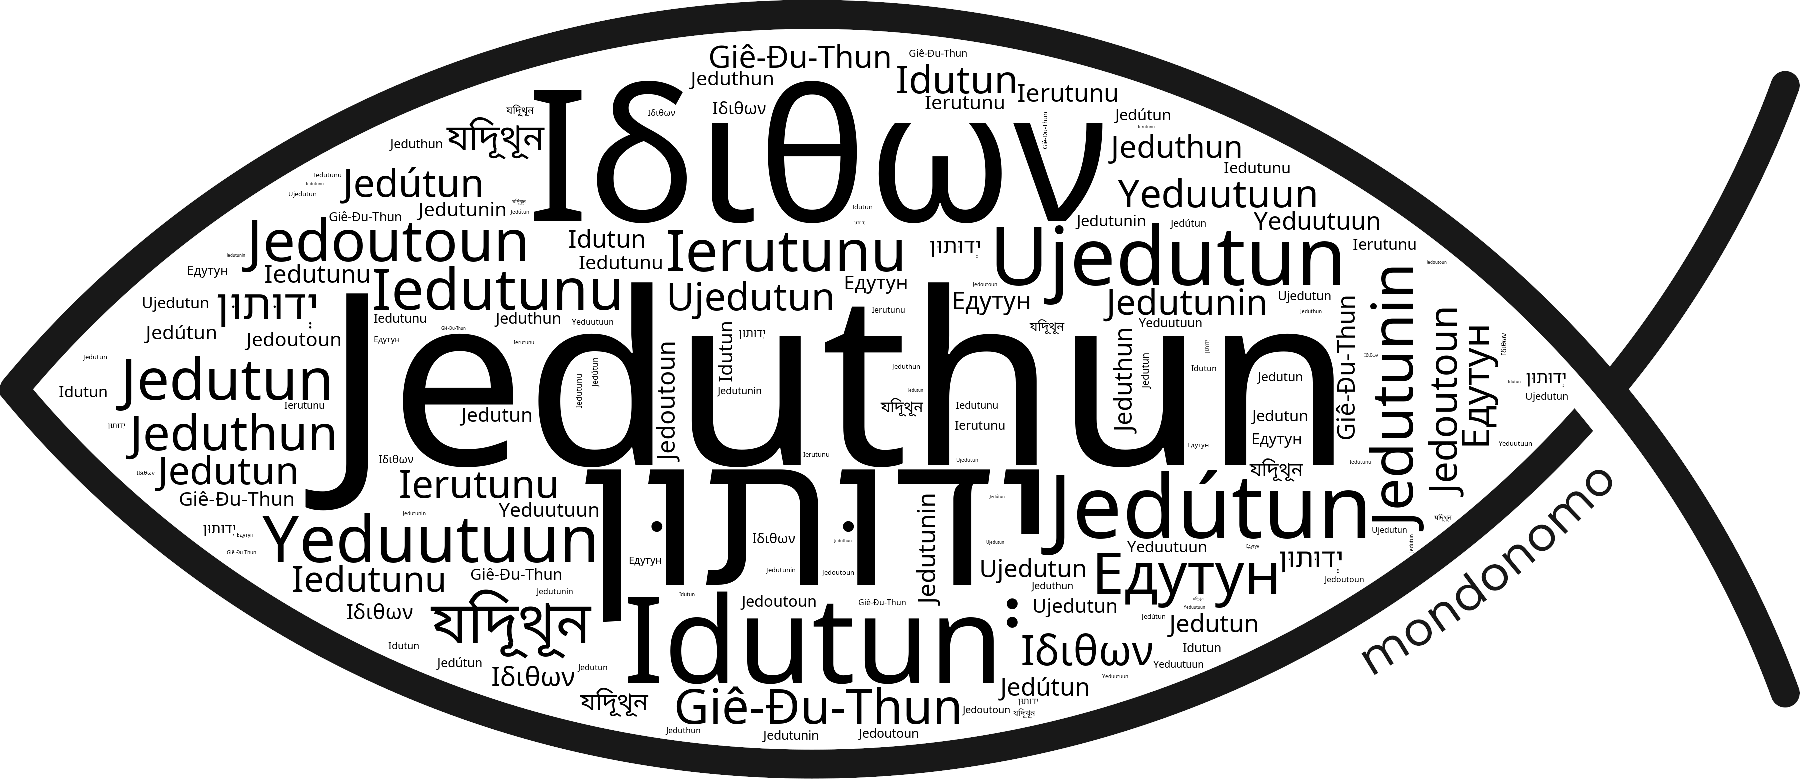 Name Jeduthun in the world's Bibles